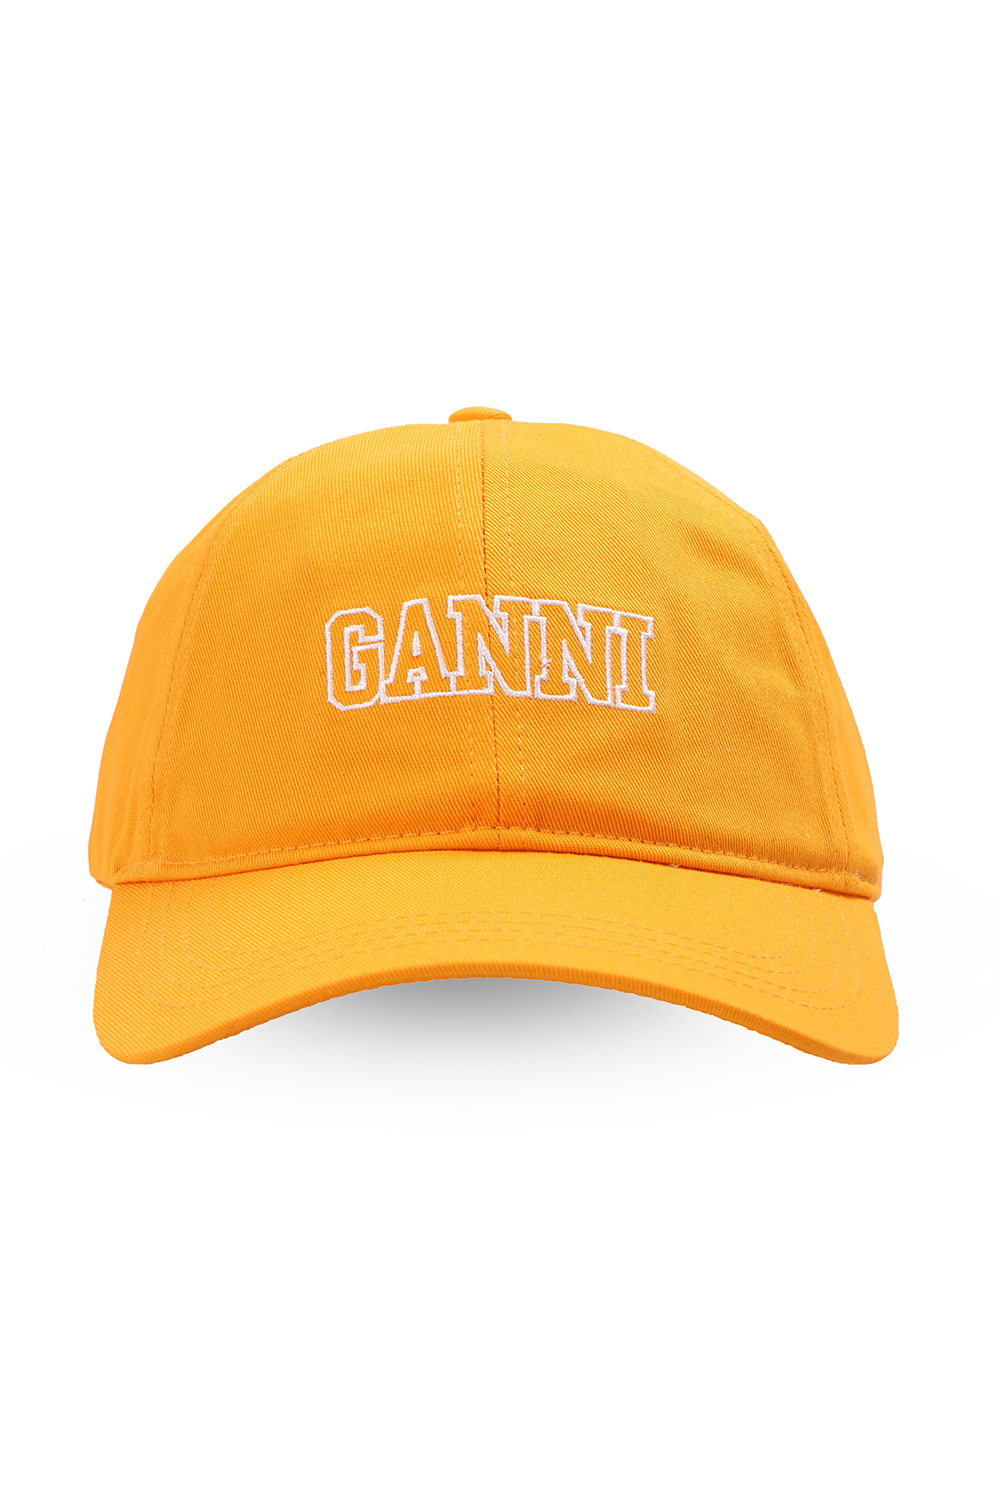 Ganni robes caps pens polo-shirts lighters belts